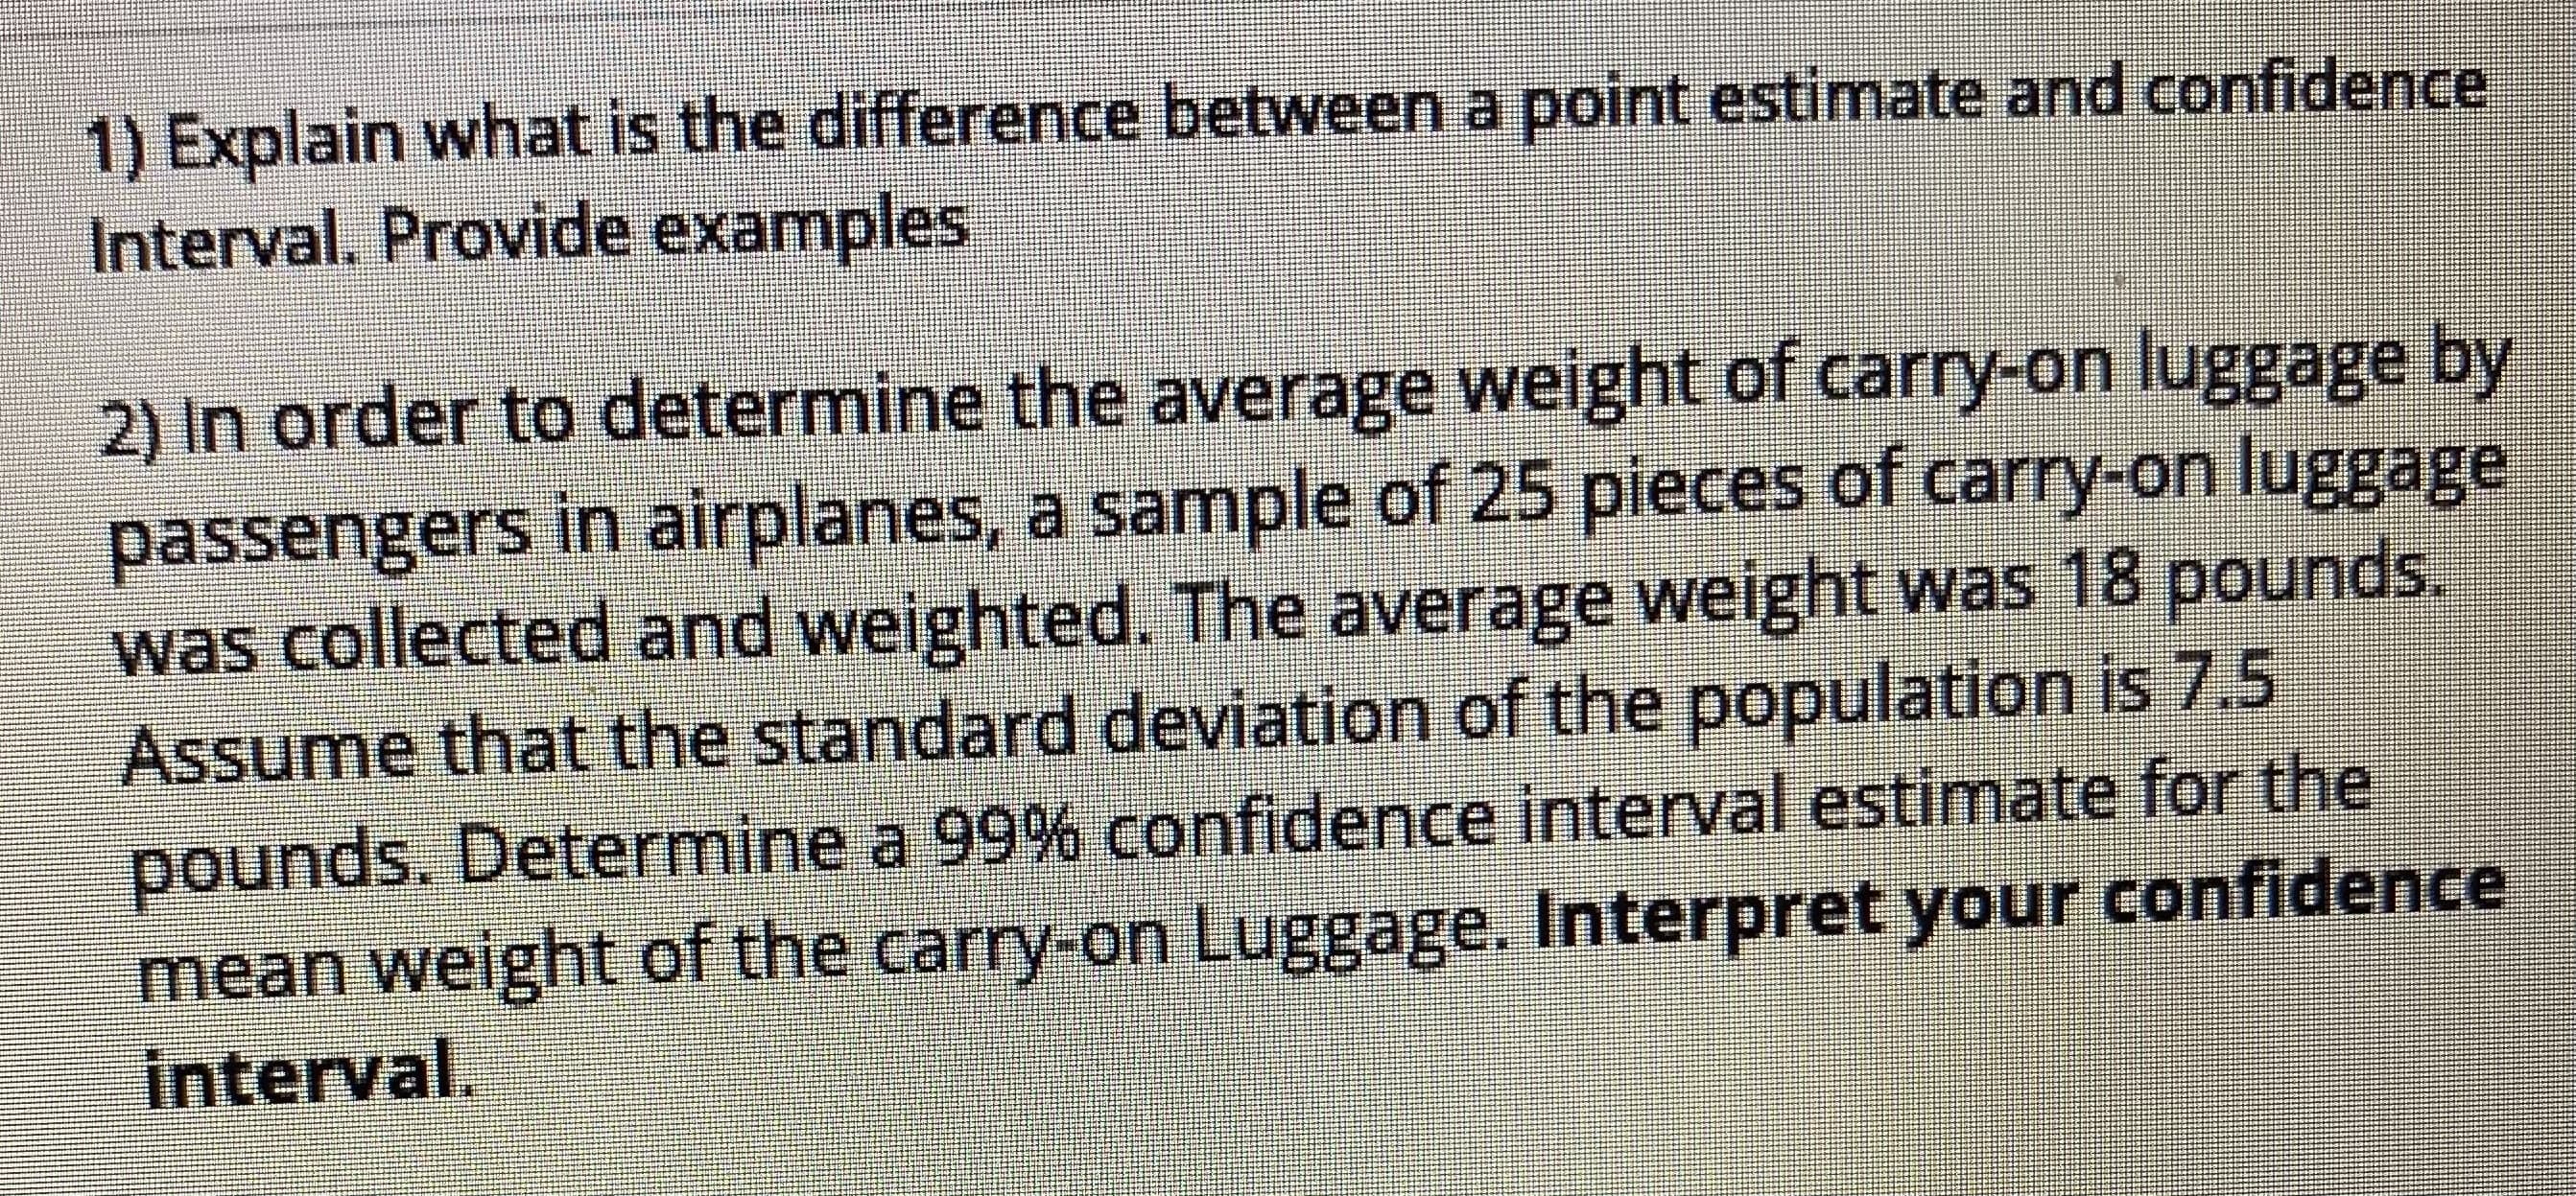 1) Explain what is the difference between a point estimate and confidence
Interval, Provide examples
